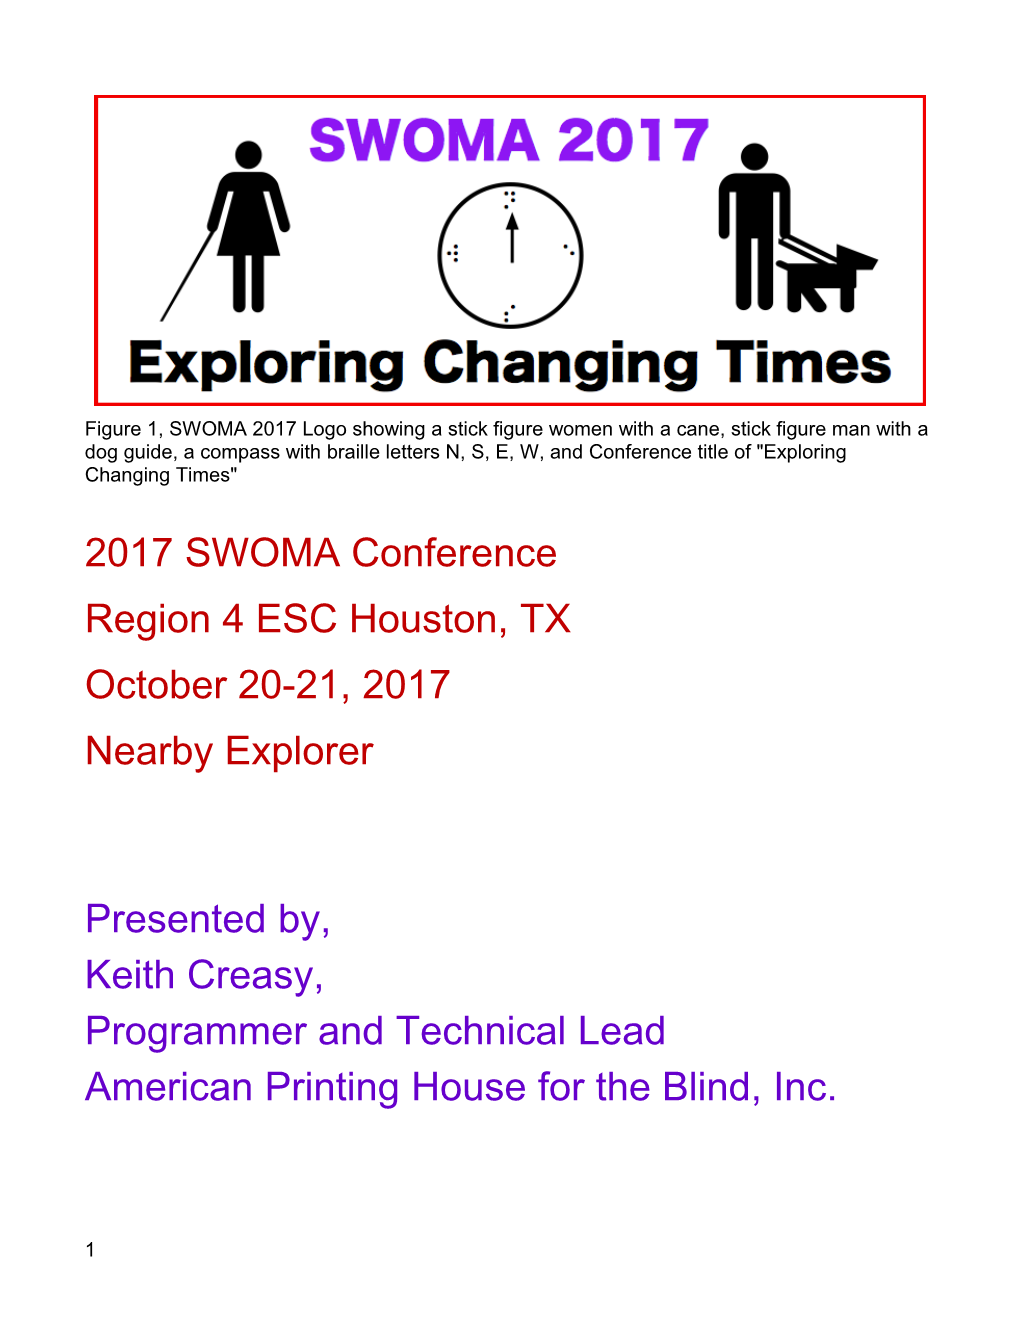 Figure 1, SWOMA 2017 Logo Showing a Stick Figure Women with a Cane, Stick Figure Man With